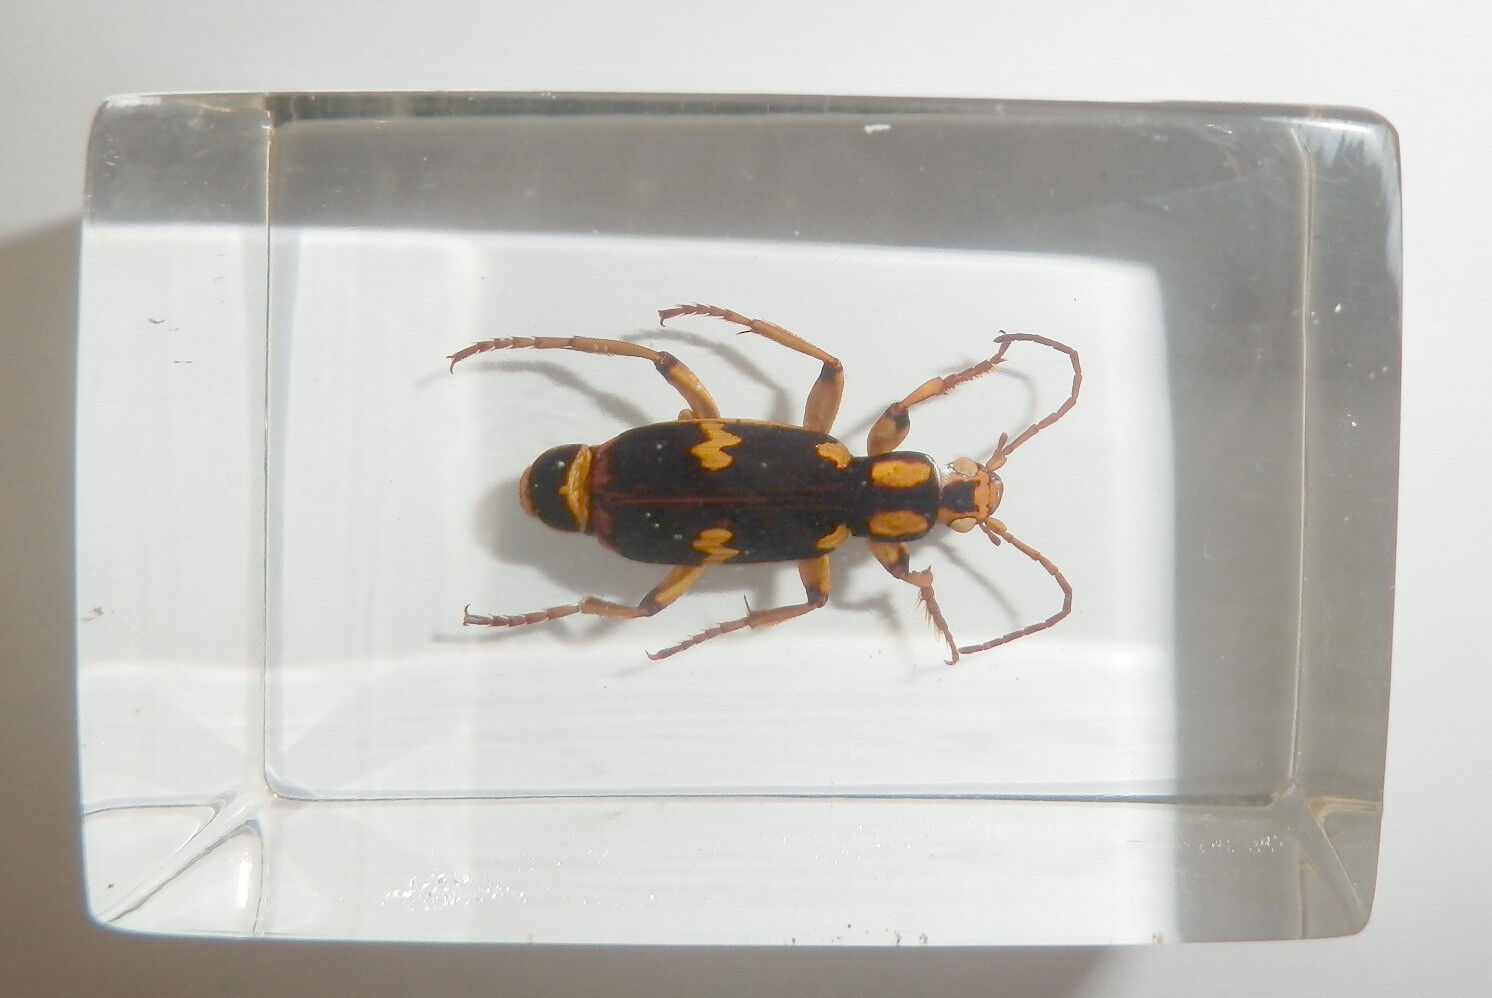 Stripe Spotted Bombardier Beetle In Clear Small Block Education Insect Specimen